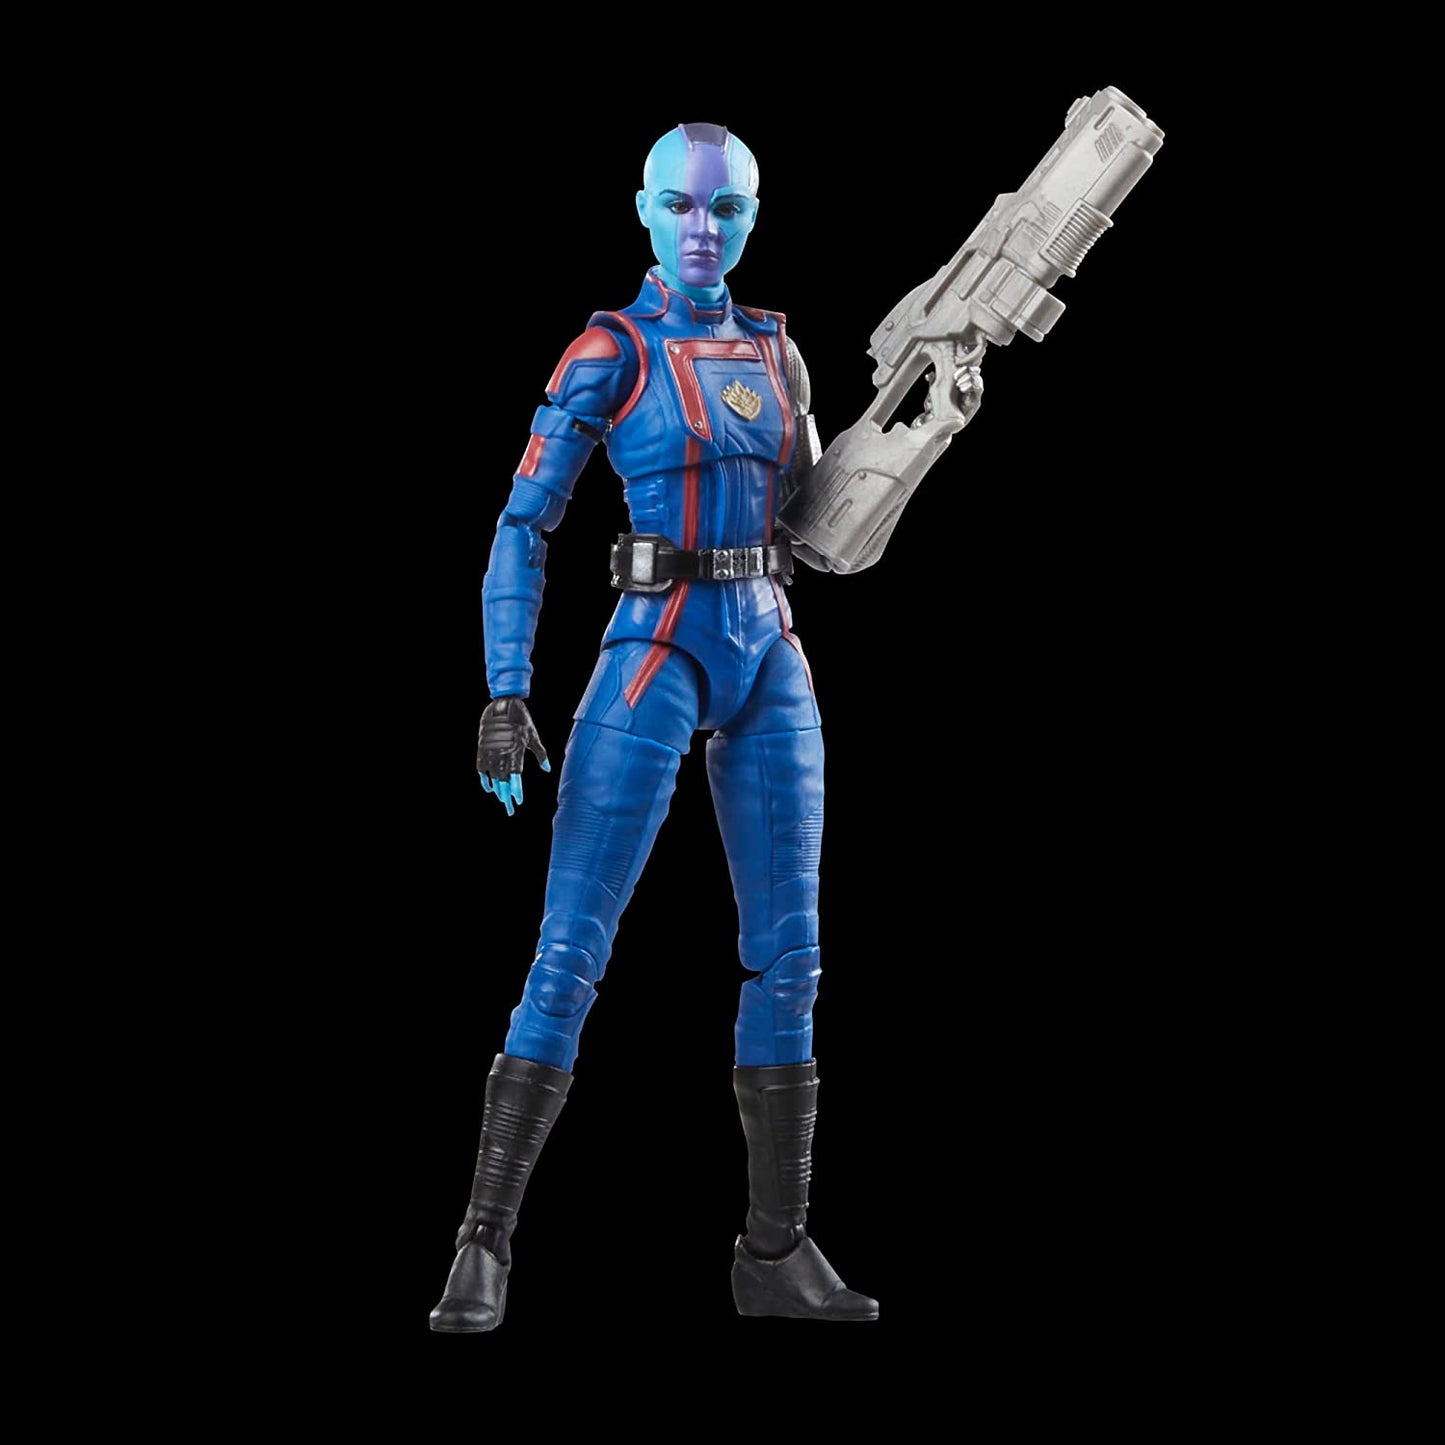  Guardians of the Galaxy Vol. 3 Marvel Legends Nebula 6-Inch Action Figure Toy - Heretoserveyou